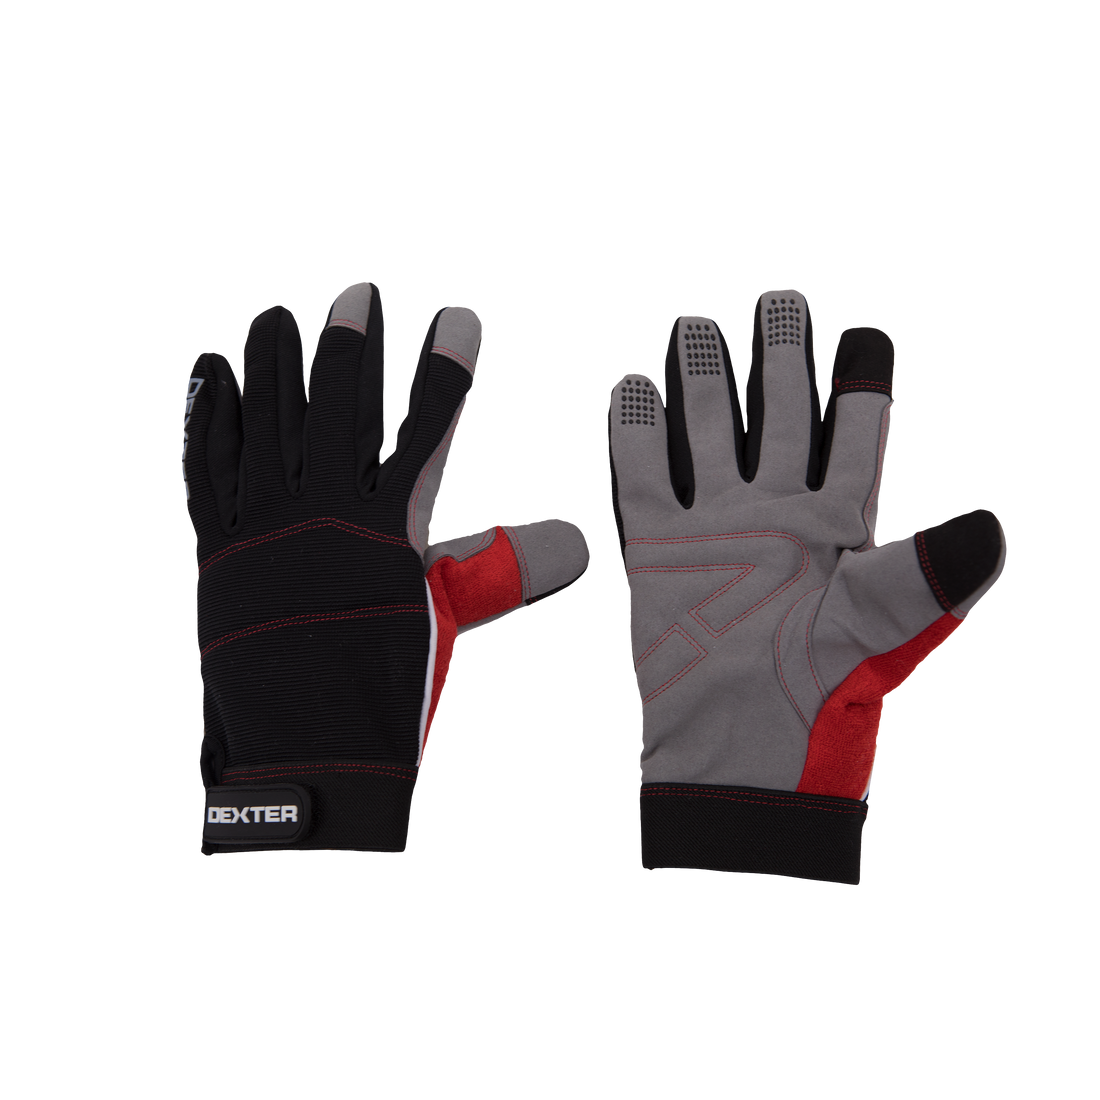 DEXTER MULTI TASK TOUCH SCREEN GLOVES IN POLYESTER, NYLON AND SPANDEX SIZE 10XL